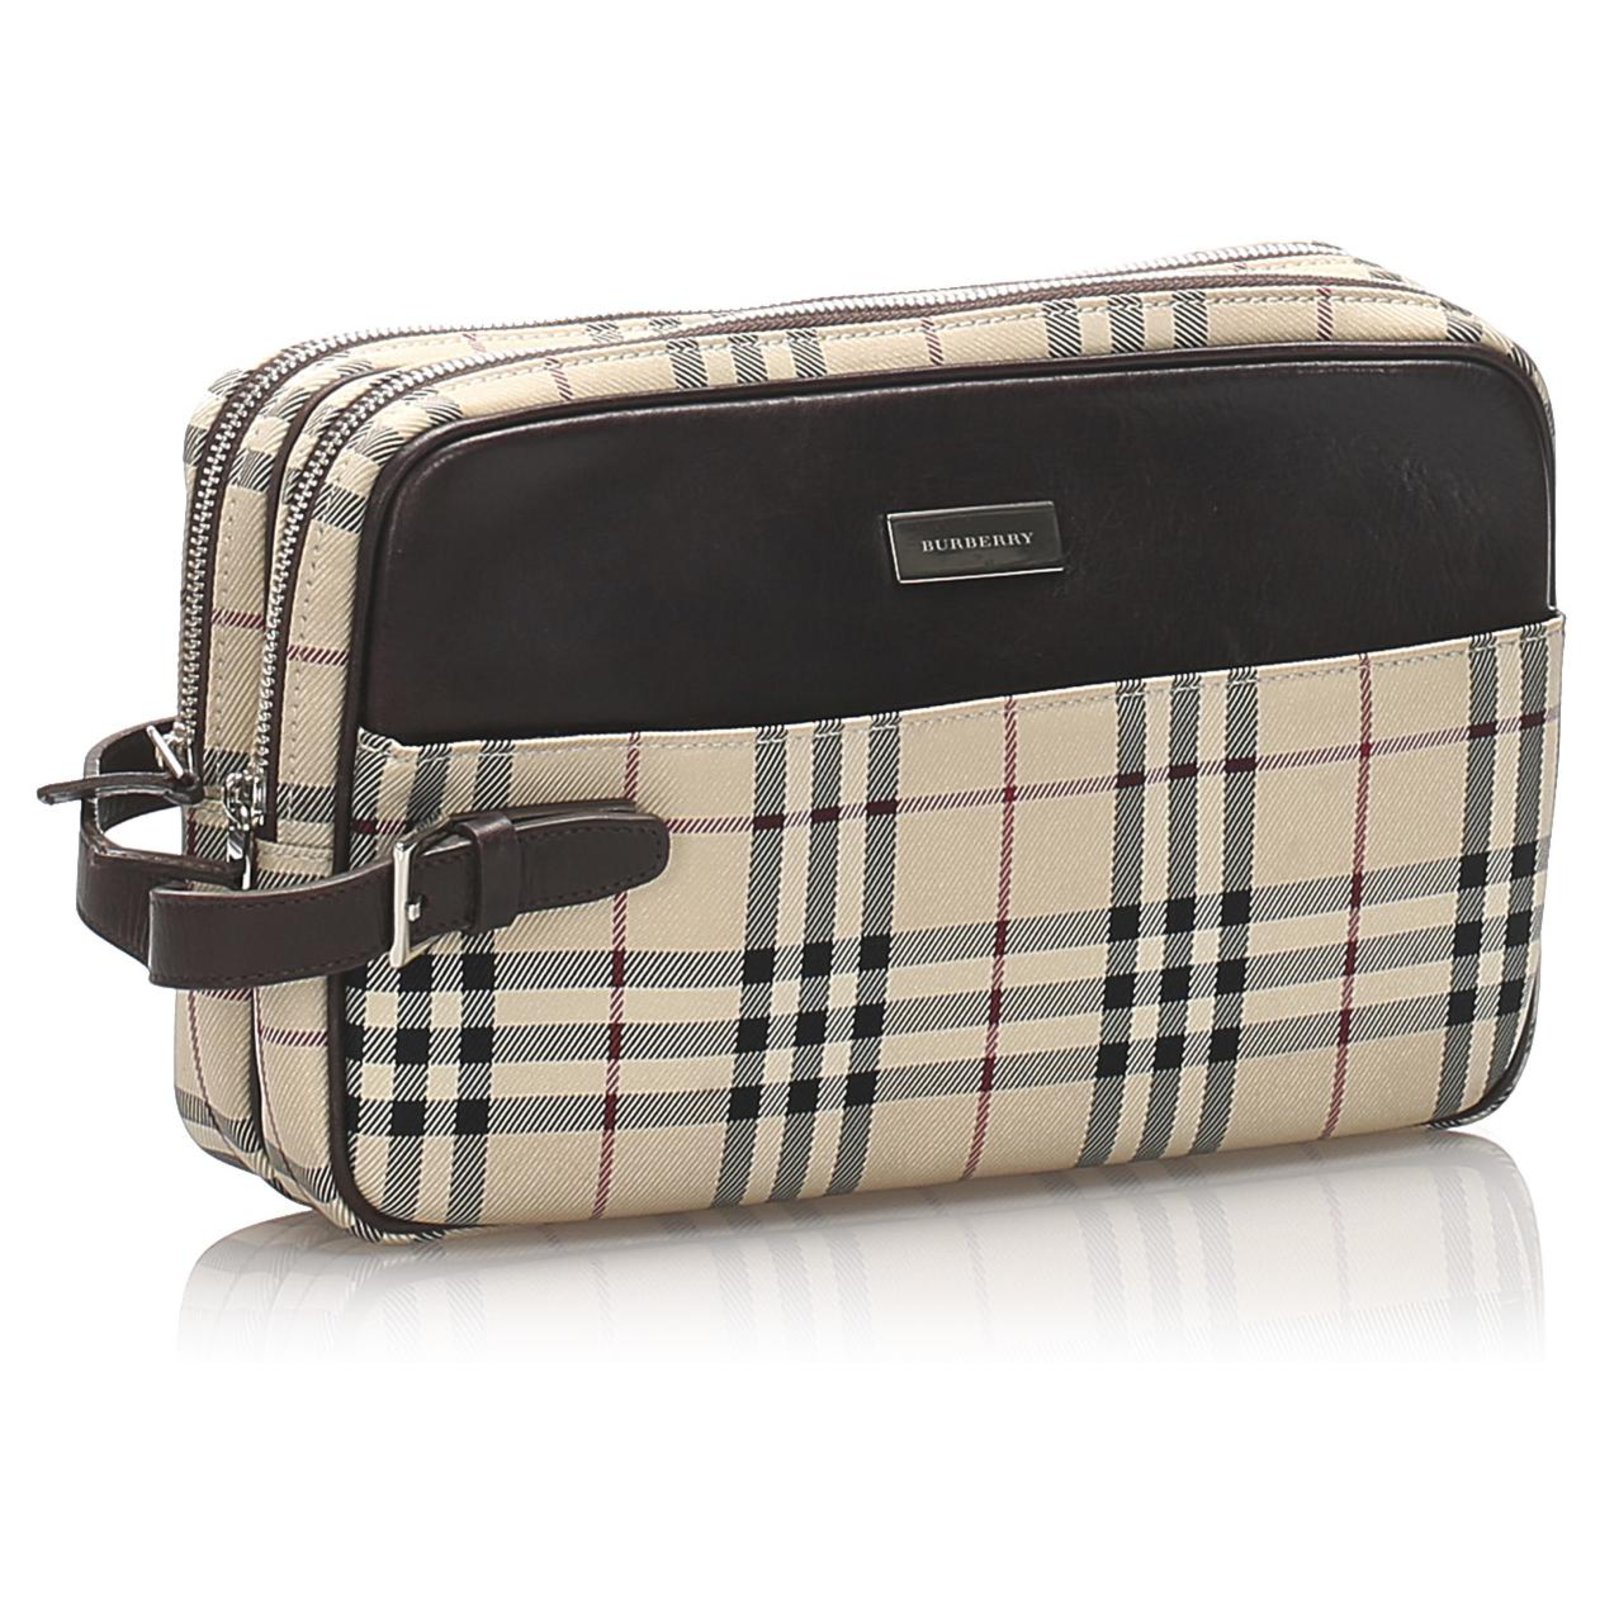 burberry house check and leather clutch bag